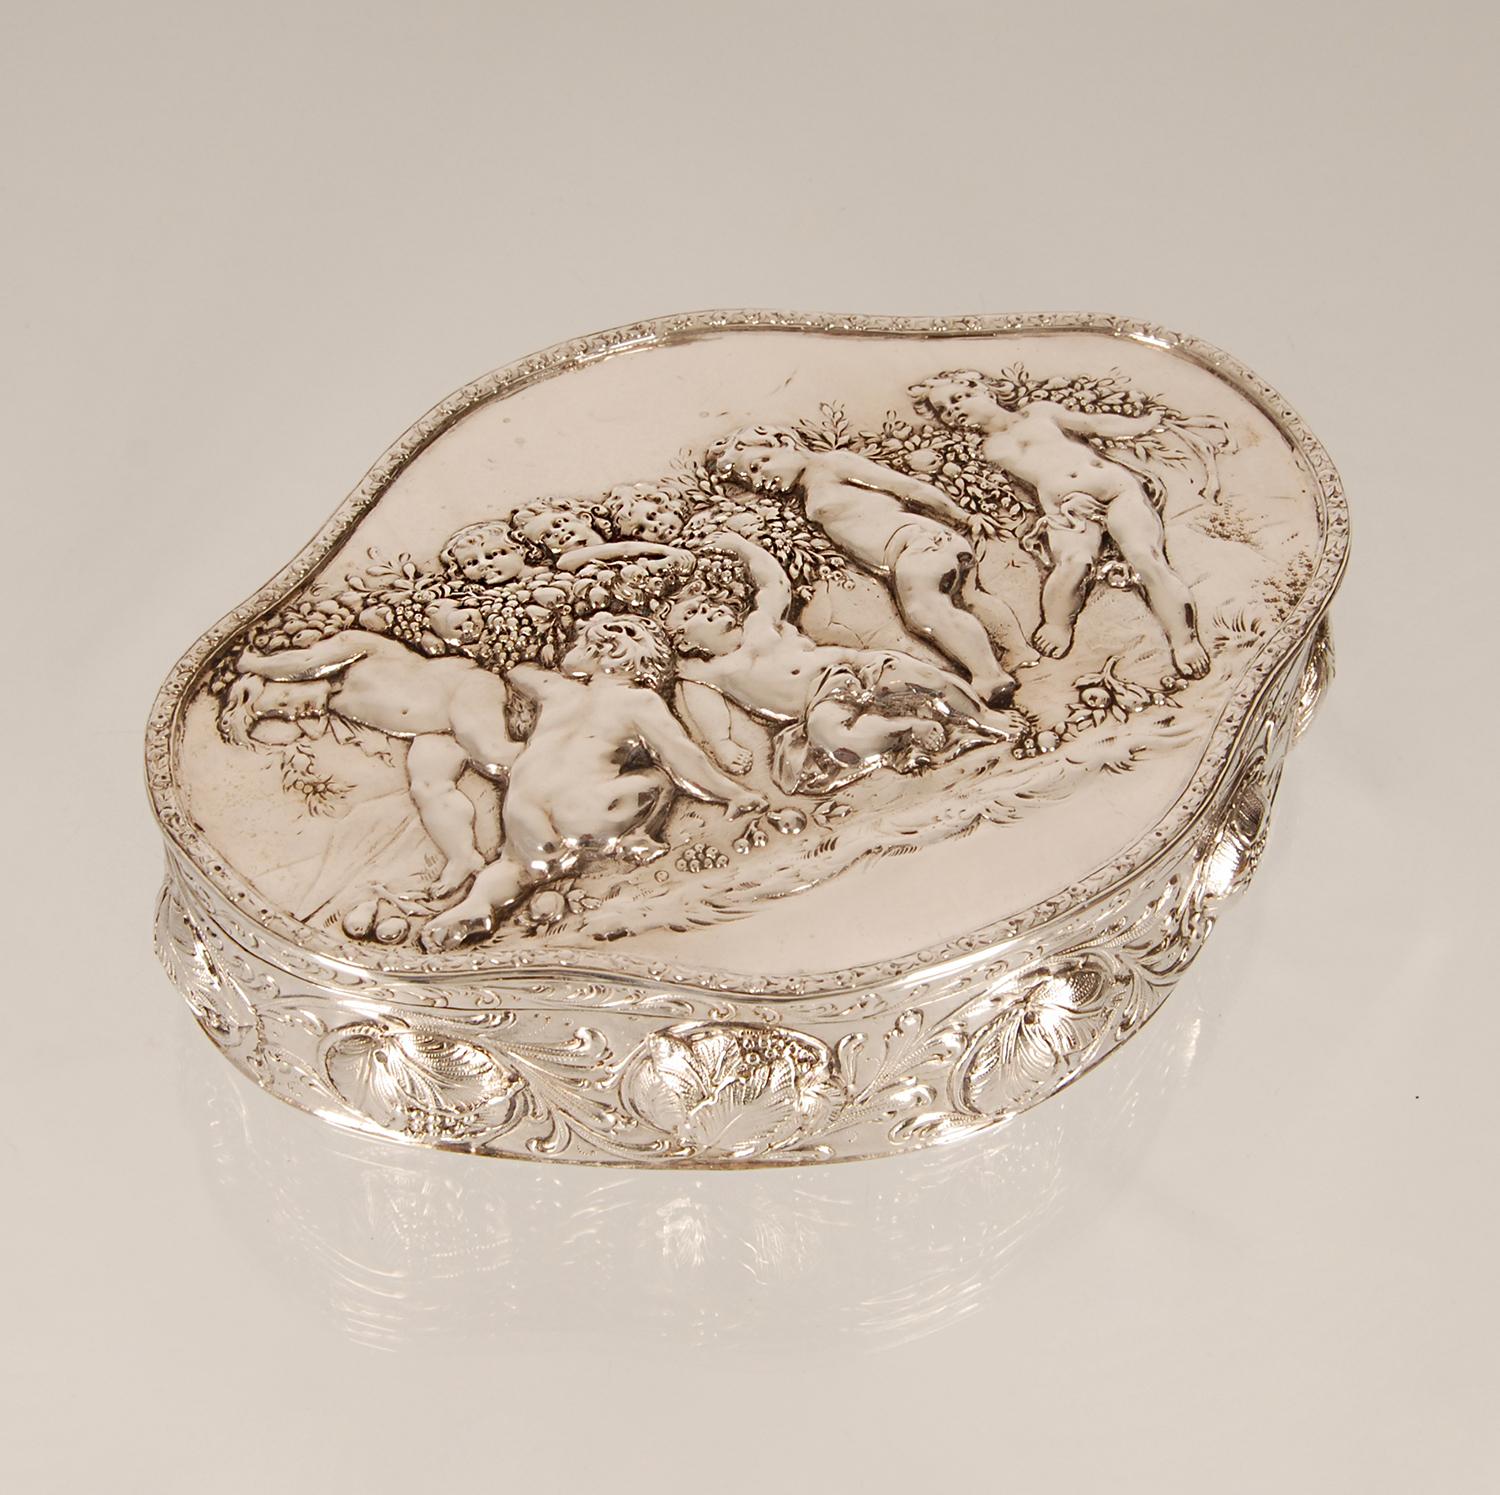 Rococo Revival Hanau Silver Jewelry Box J.D.Schleissner and Sons Antique German Casket Putto For Sale